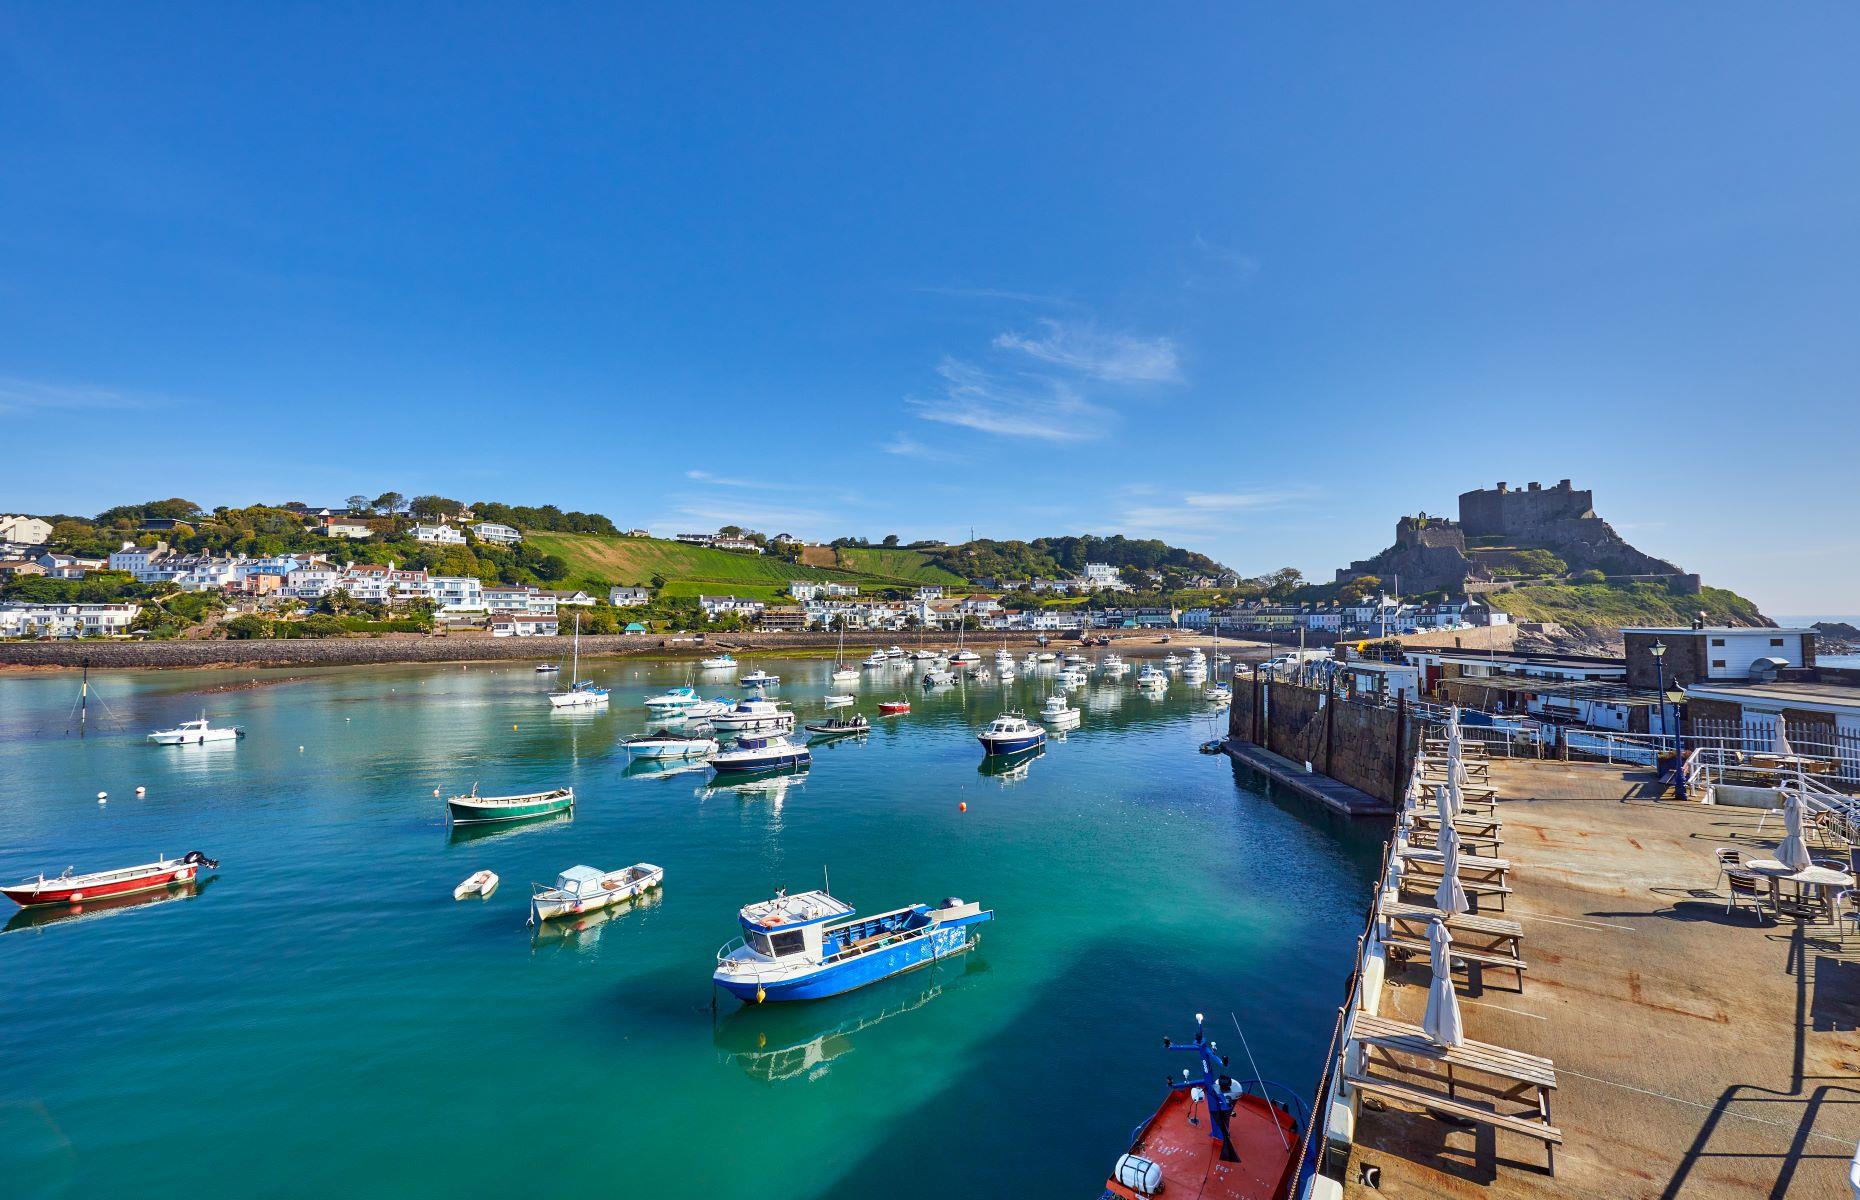 <p><strong>Index score: 80.38</strong></p>  <p>Like Guernsey, Jersey is a British Crown Dependency and one of the Channel Islands. Also like Guernsey, its cost of living is substantially higher than that of the UK, with rent driving a lot of the discrepancy. Consumer prices in general are 33.5% higher, but the cost of renting property in Jersey is a staggering 79.86% more expensive than it is in the UK.</p>